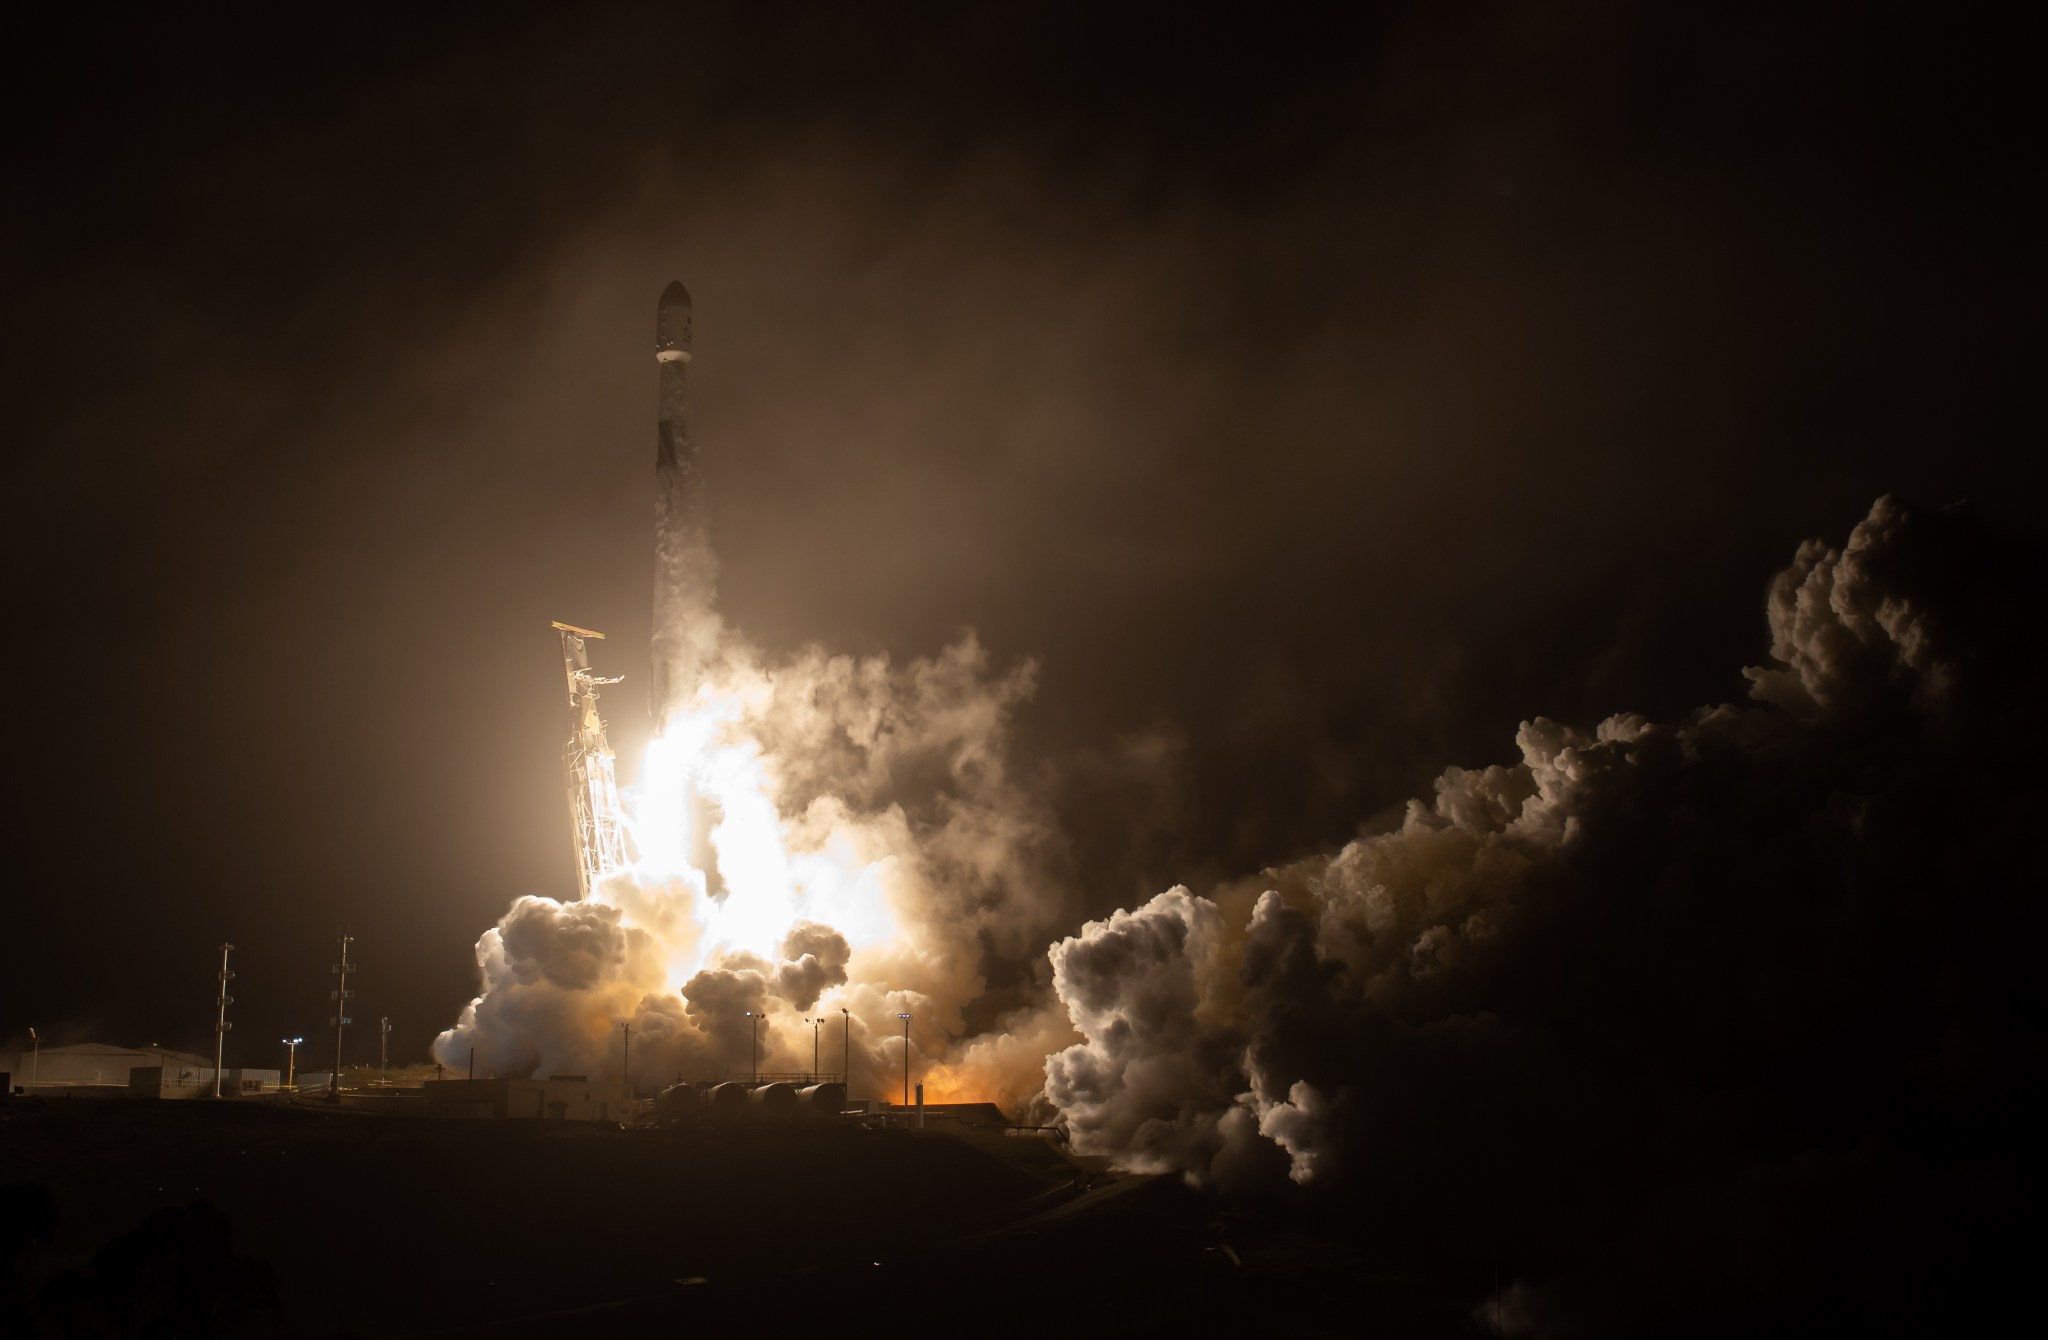 A SpaceX Falcon 9 rocket lifts off from Space Launch Complex 4 at Vandenberg Space Force Base in California on Nov. 24, 2021, carrying NASA’s Double Asteroid Redirection Test (DART) spacecraft. Liftoff was at 1:21 a.m. EST. 